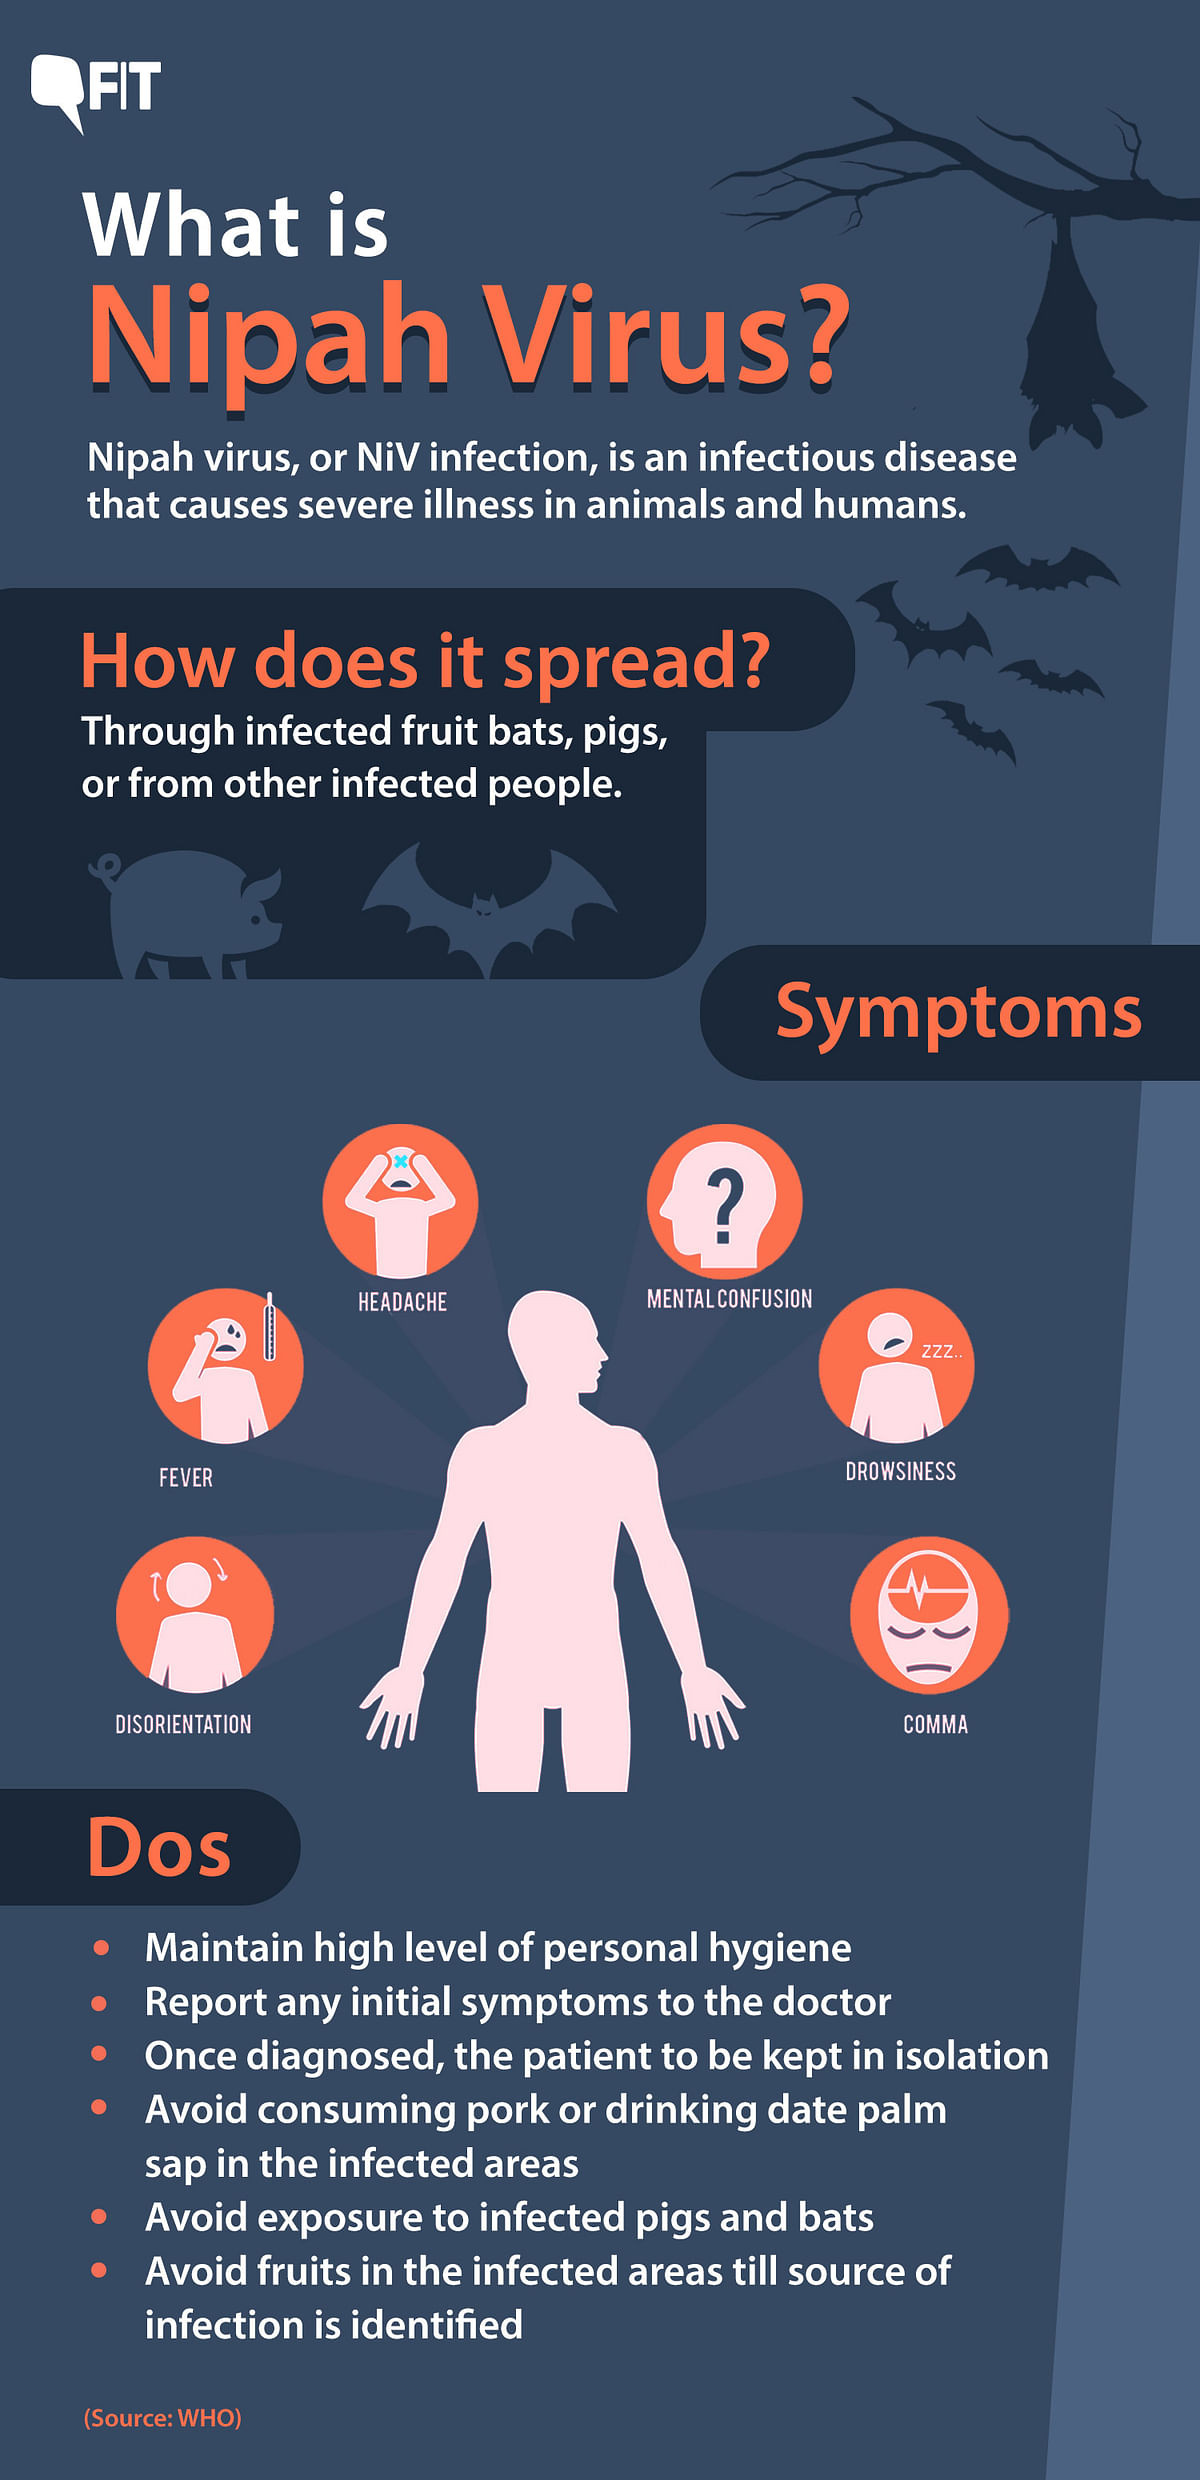 Here’s all you need to know about the Nipah virus and how you can avoid getting sick.